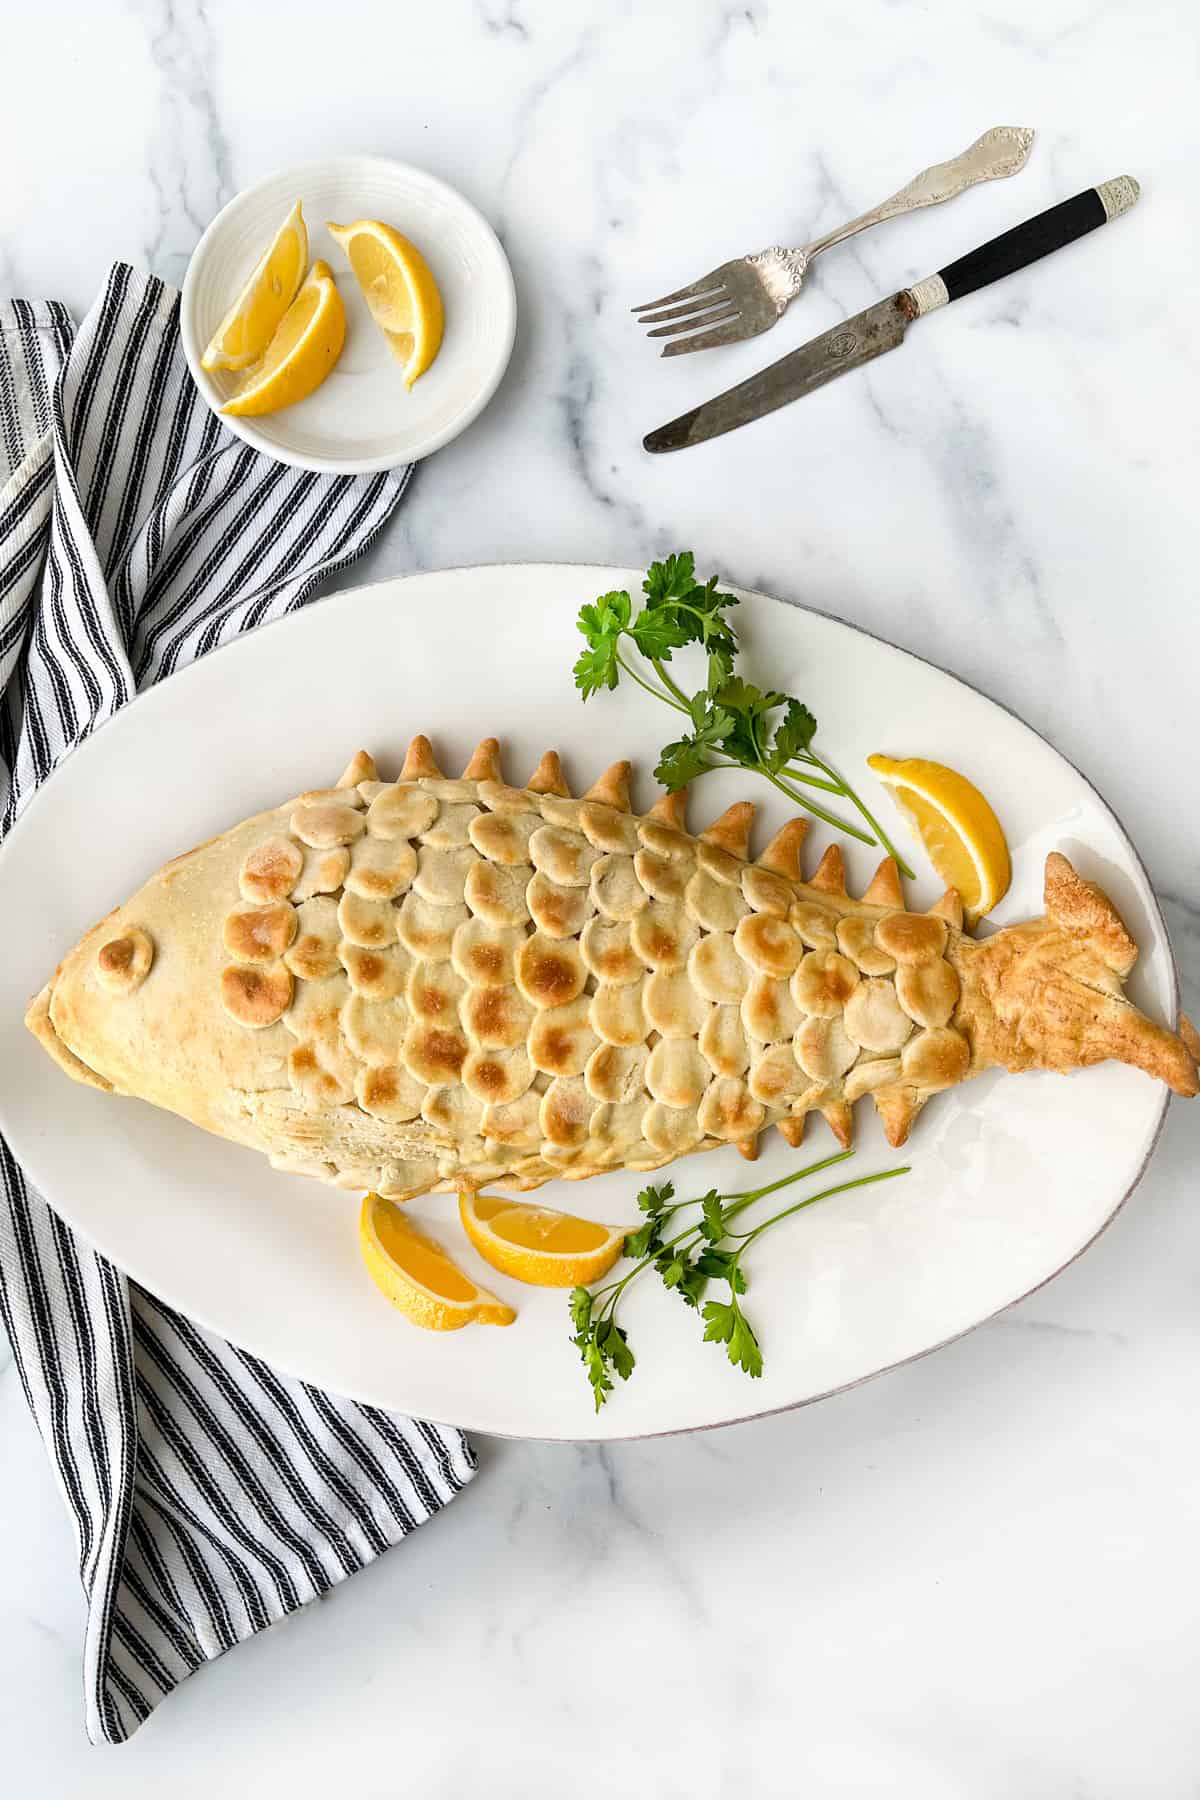 Baked fish in salt pastry shaped like a fish with scales on top of a plate with lemons and parsley and a knife and fork in the background